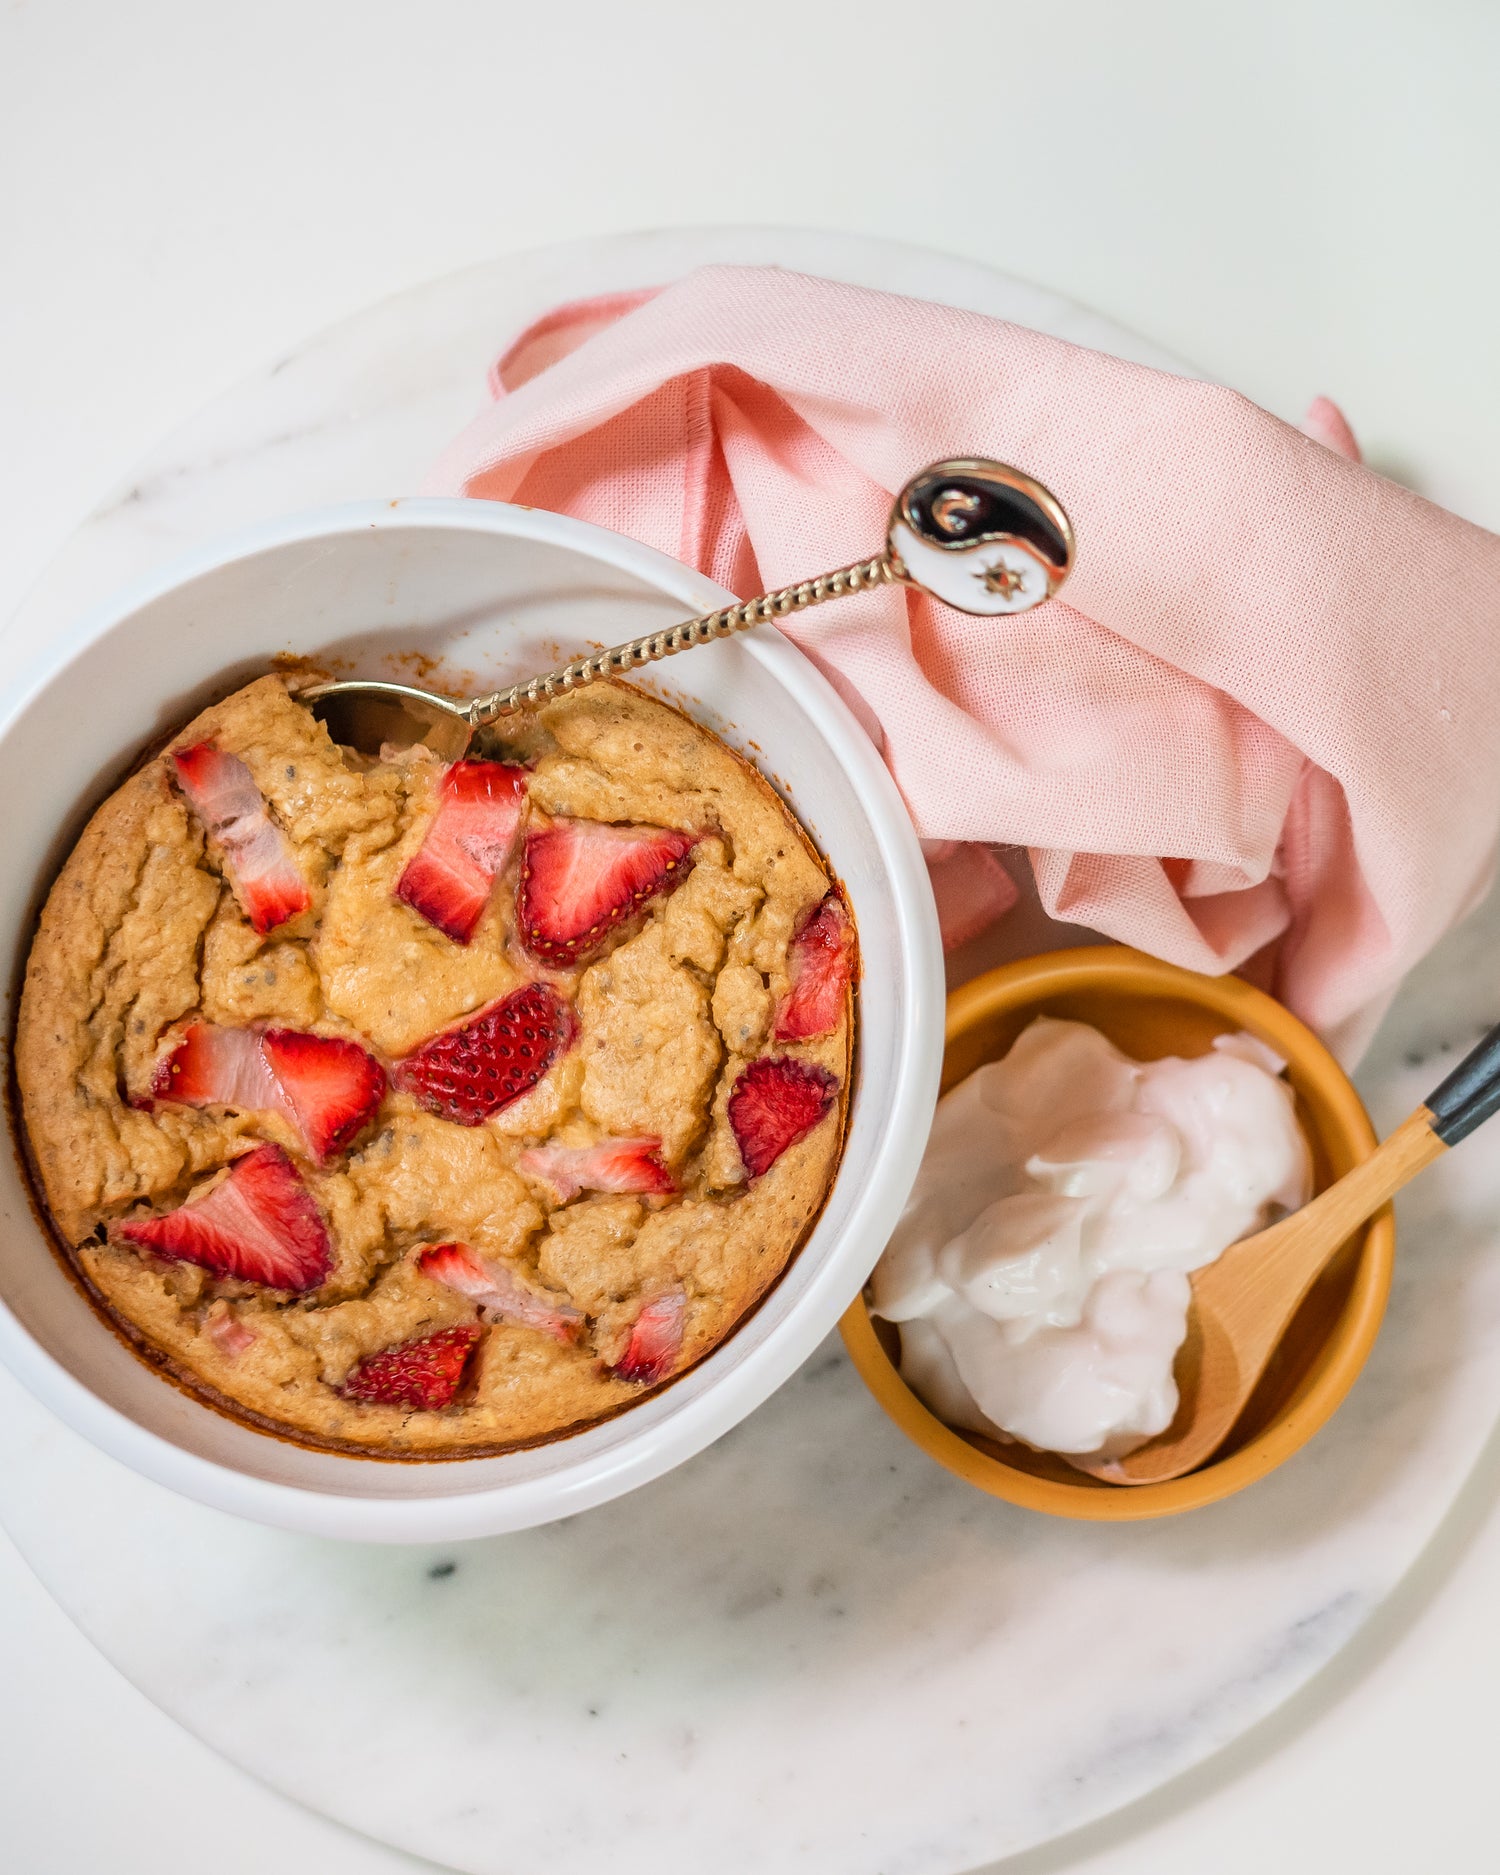 Strawberry Baked Oatmeal